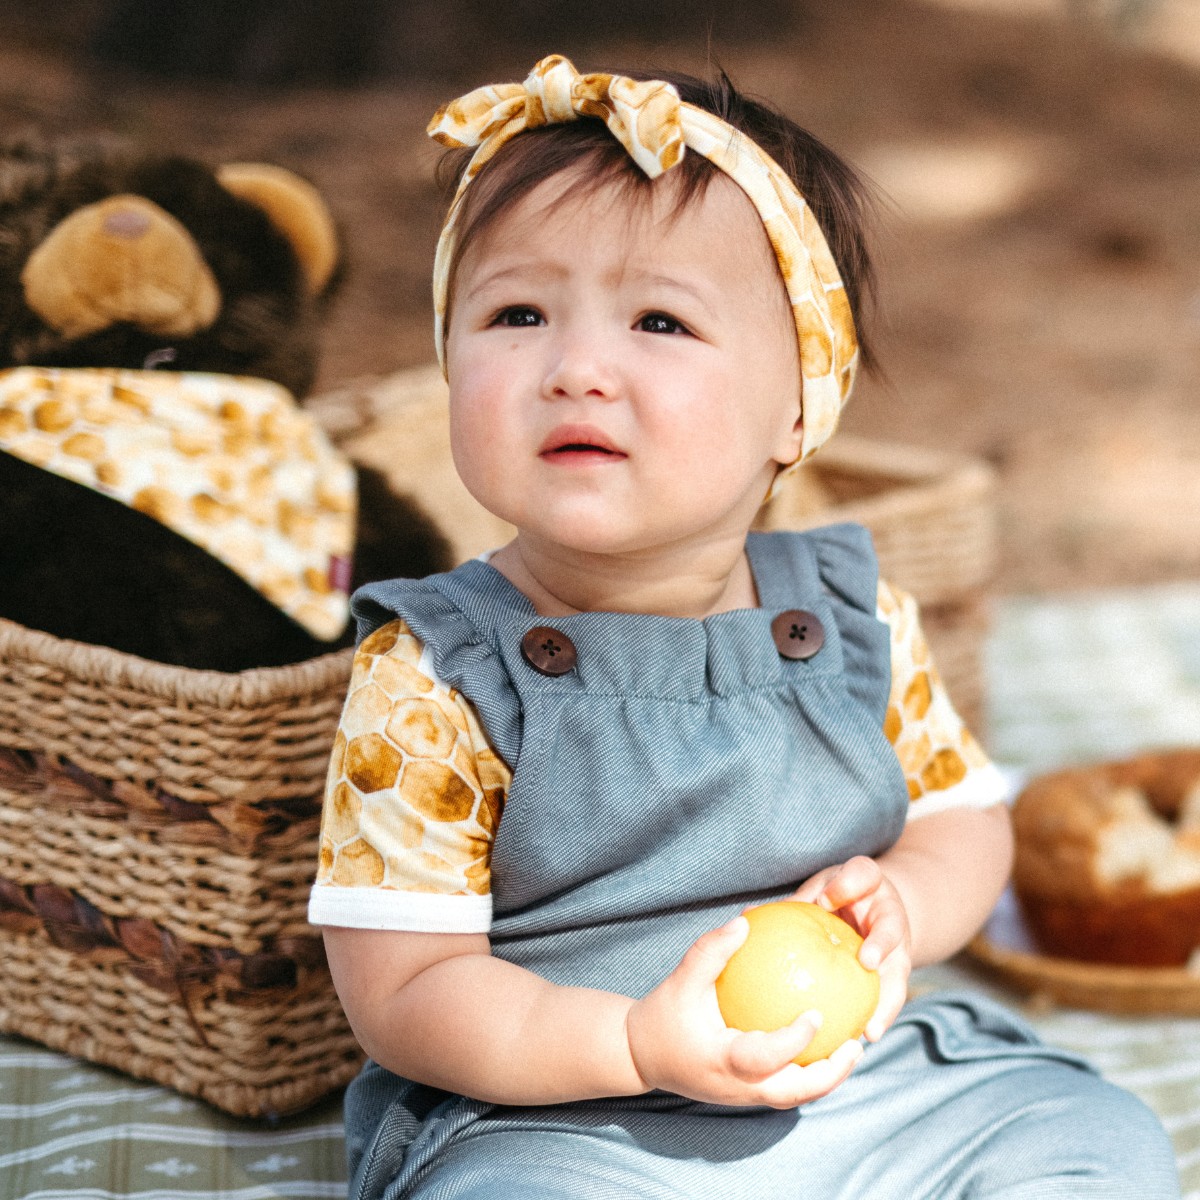 Baby girl outside having a picnic wearing the Honeycomb Bamboo Knotted Headband by Milkbarn